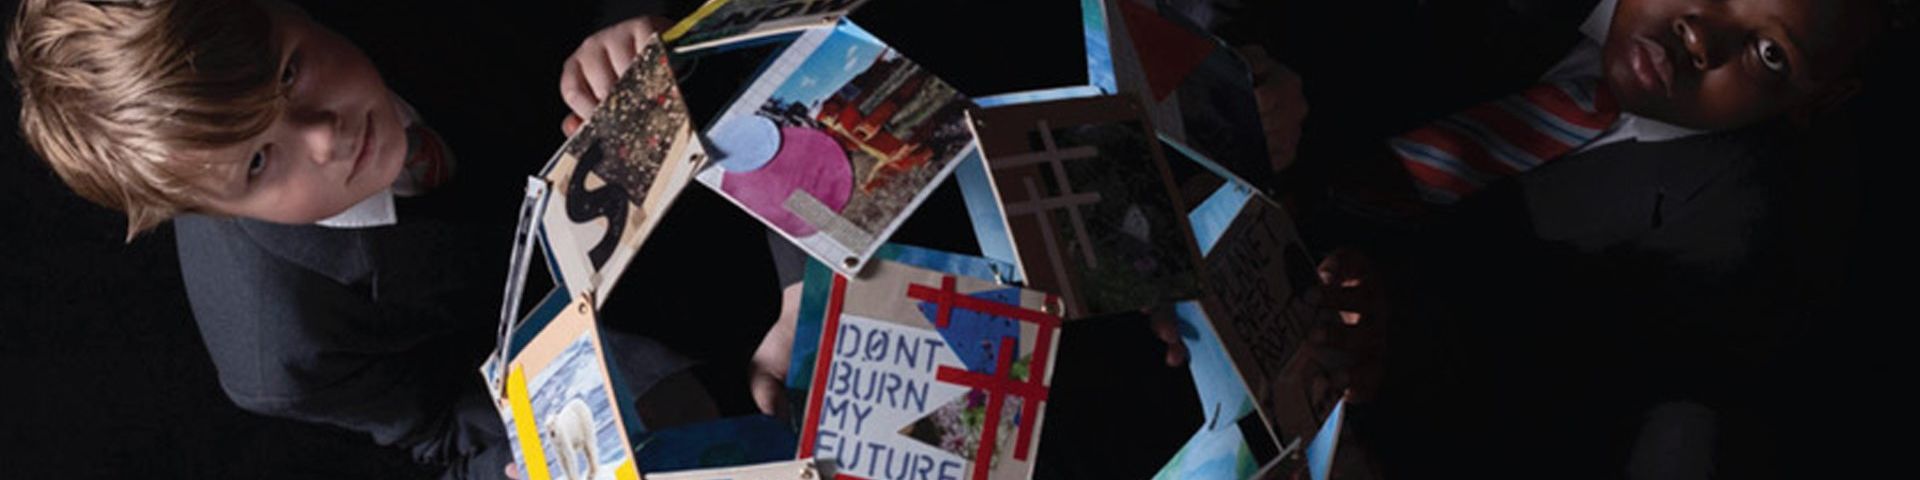 Taken from above, two children, on the left and right of the photo, hold a globe made of photographs and raise their solemn faces to the camera. The clearest photo, closest to the camera displays the words ‘don’t burn my future’.